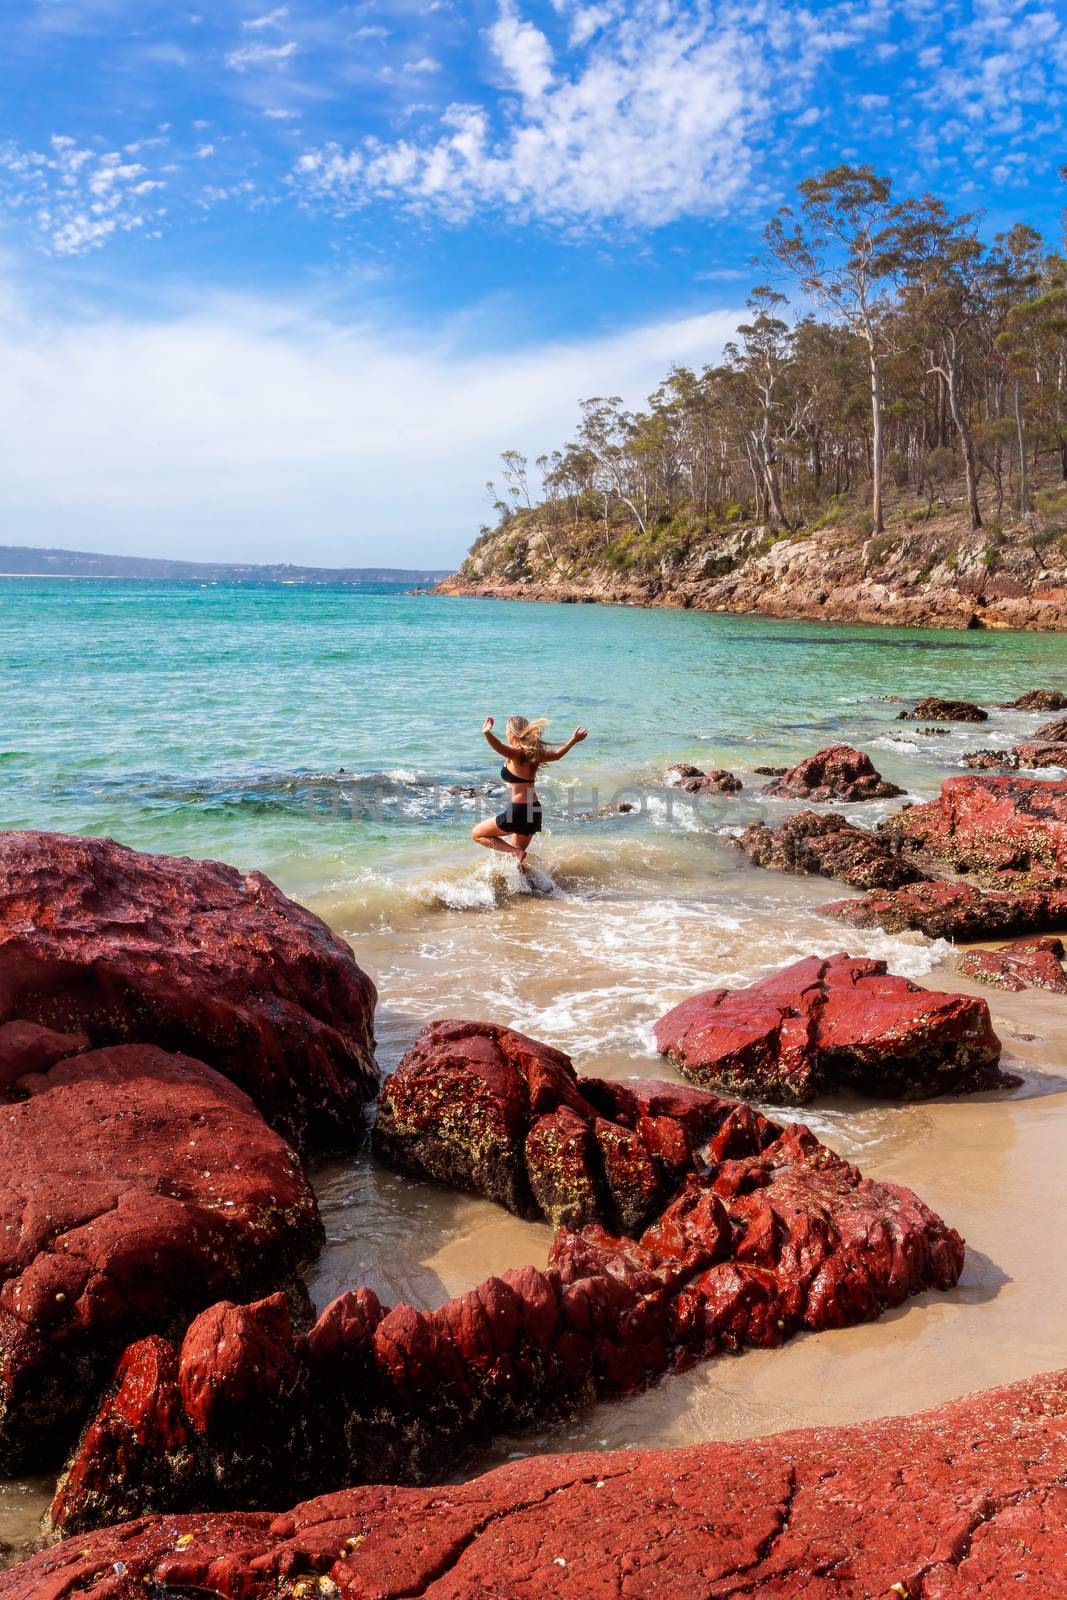 A woman playing in beach paradise, running into the aqua blue waters of the ocean.  A scattering of rich red rocks in the foreground